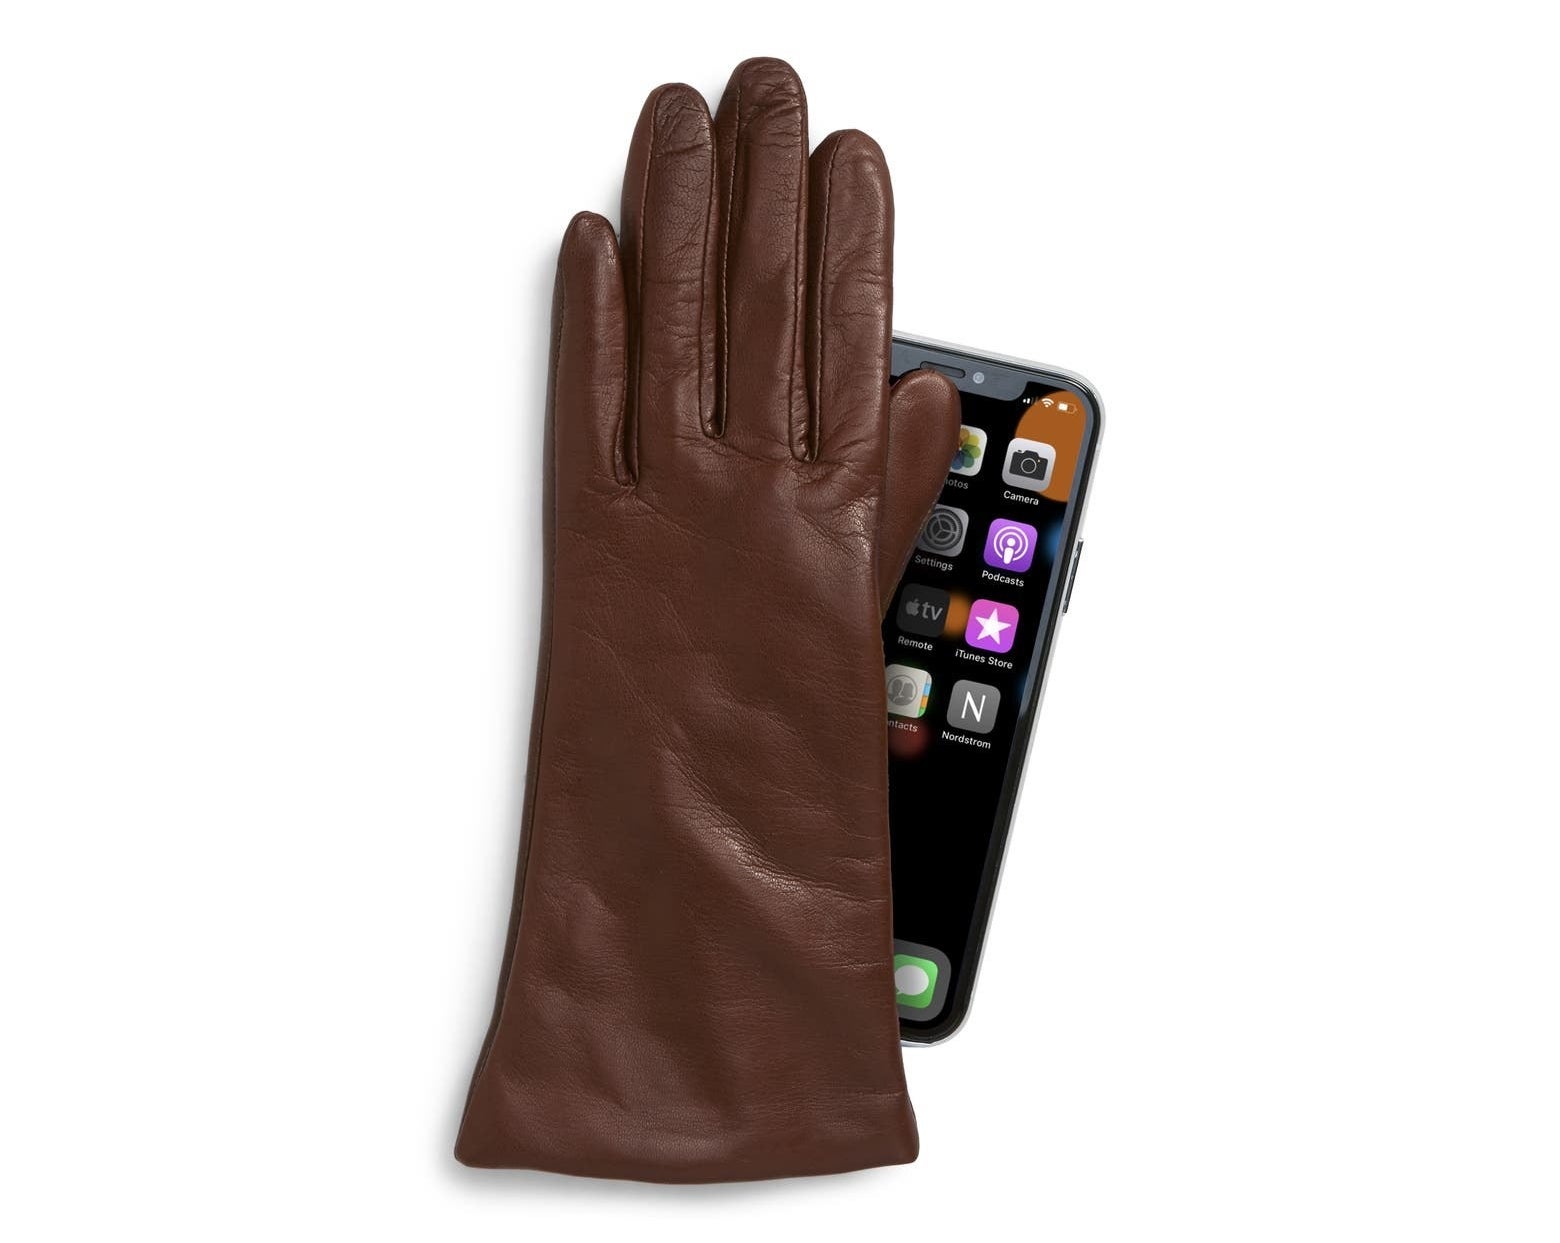 The brown leather gloves